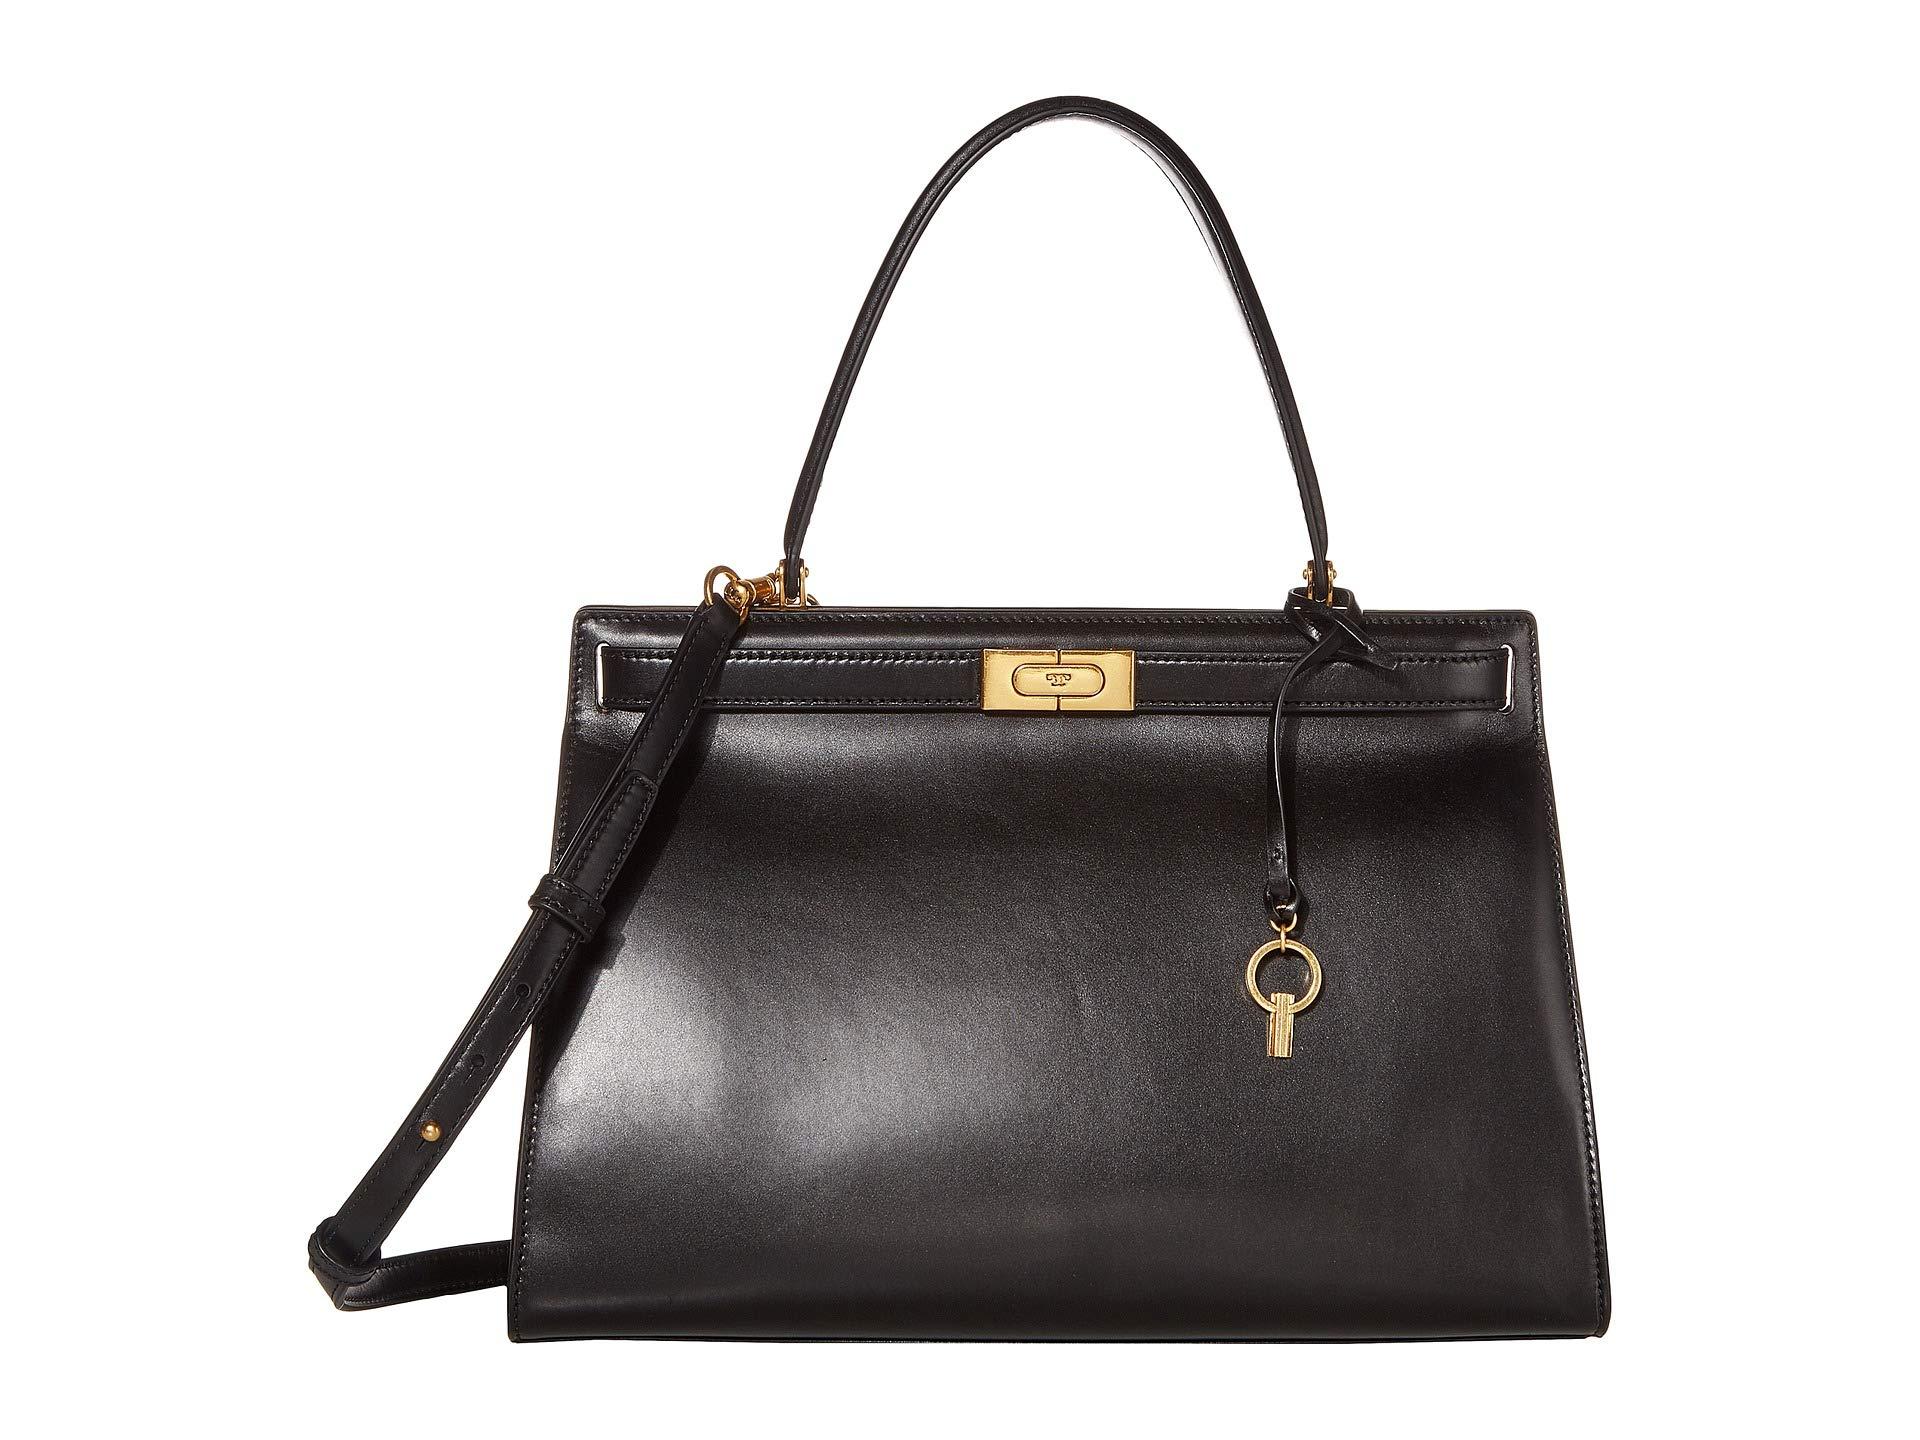 Tory Burch Leather Lee Radziwill Large Satchel in Black - Lyst